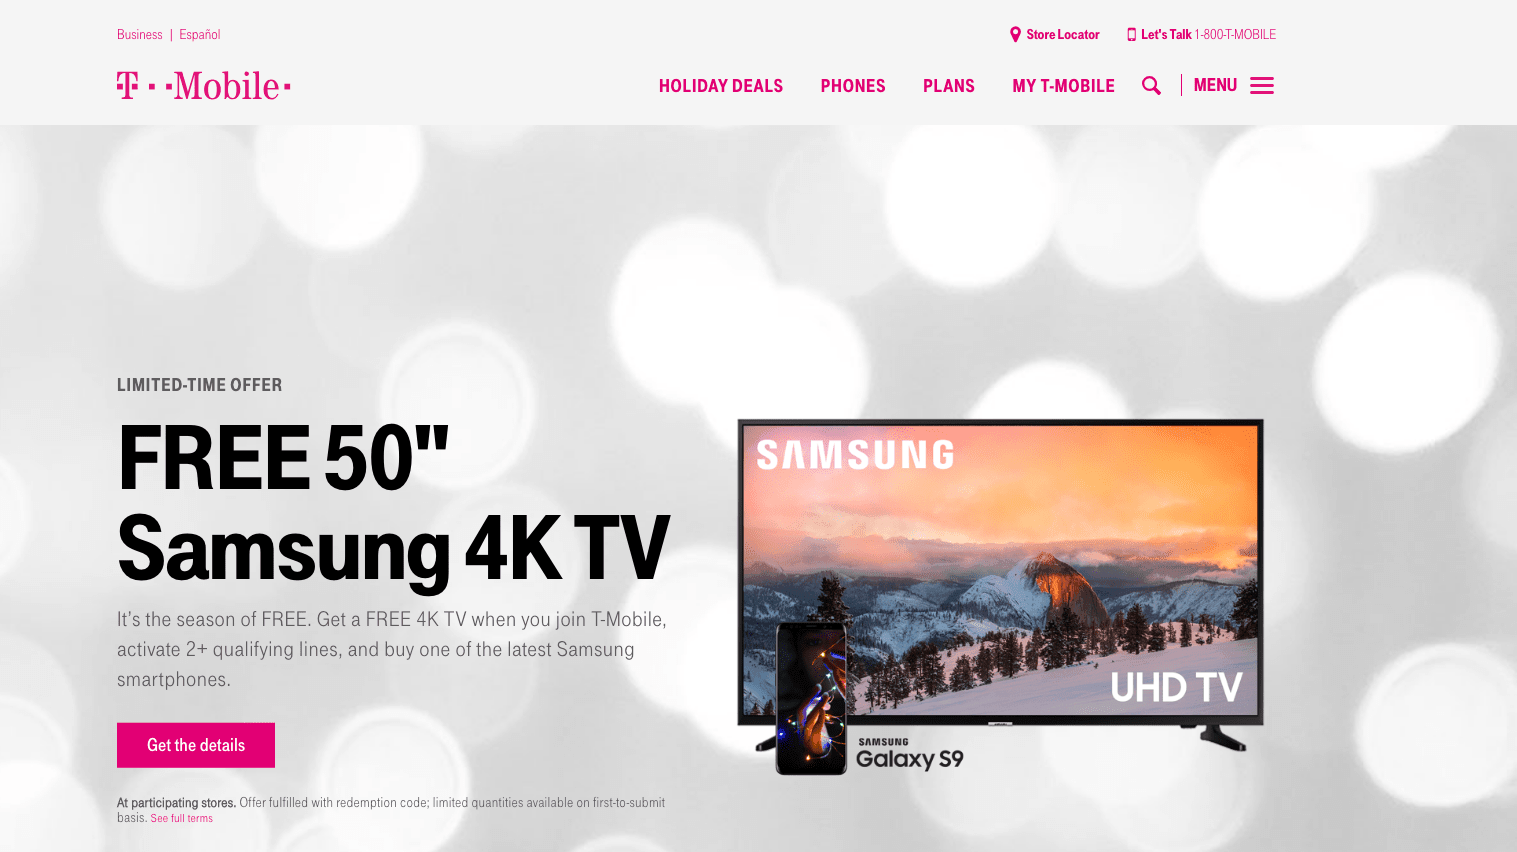 tmobile.com is a good website design example for its great use of design patterns